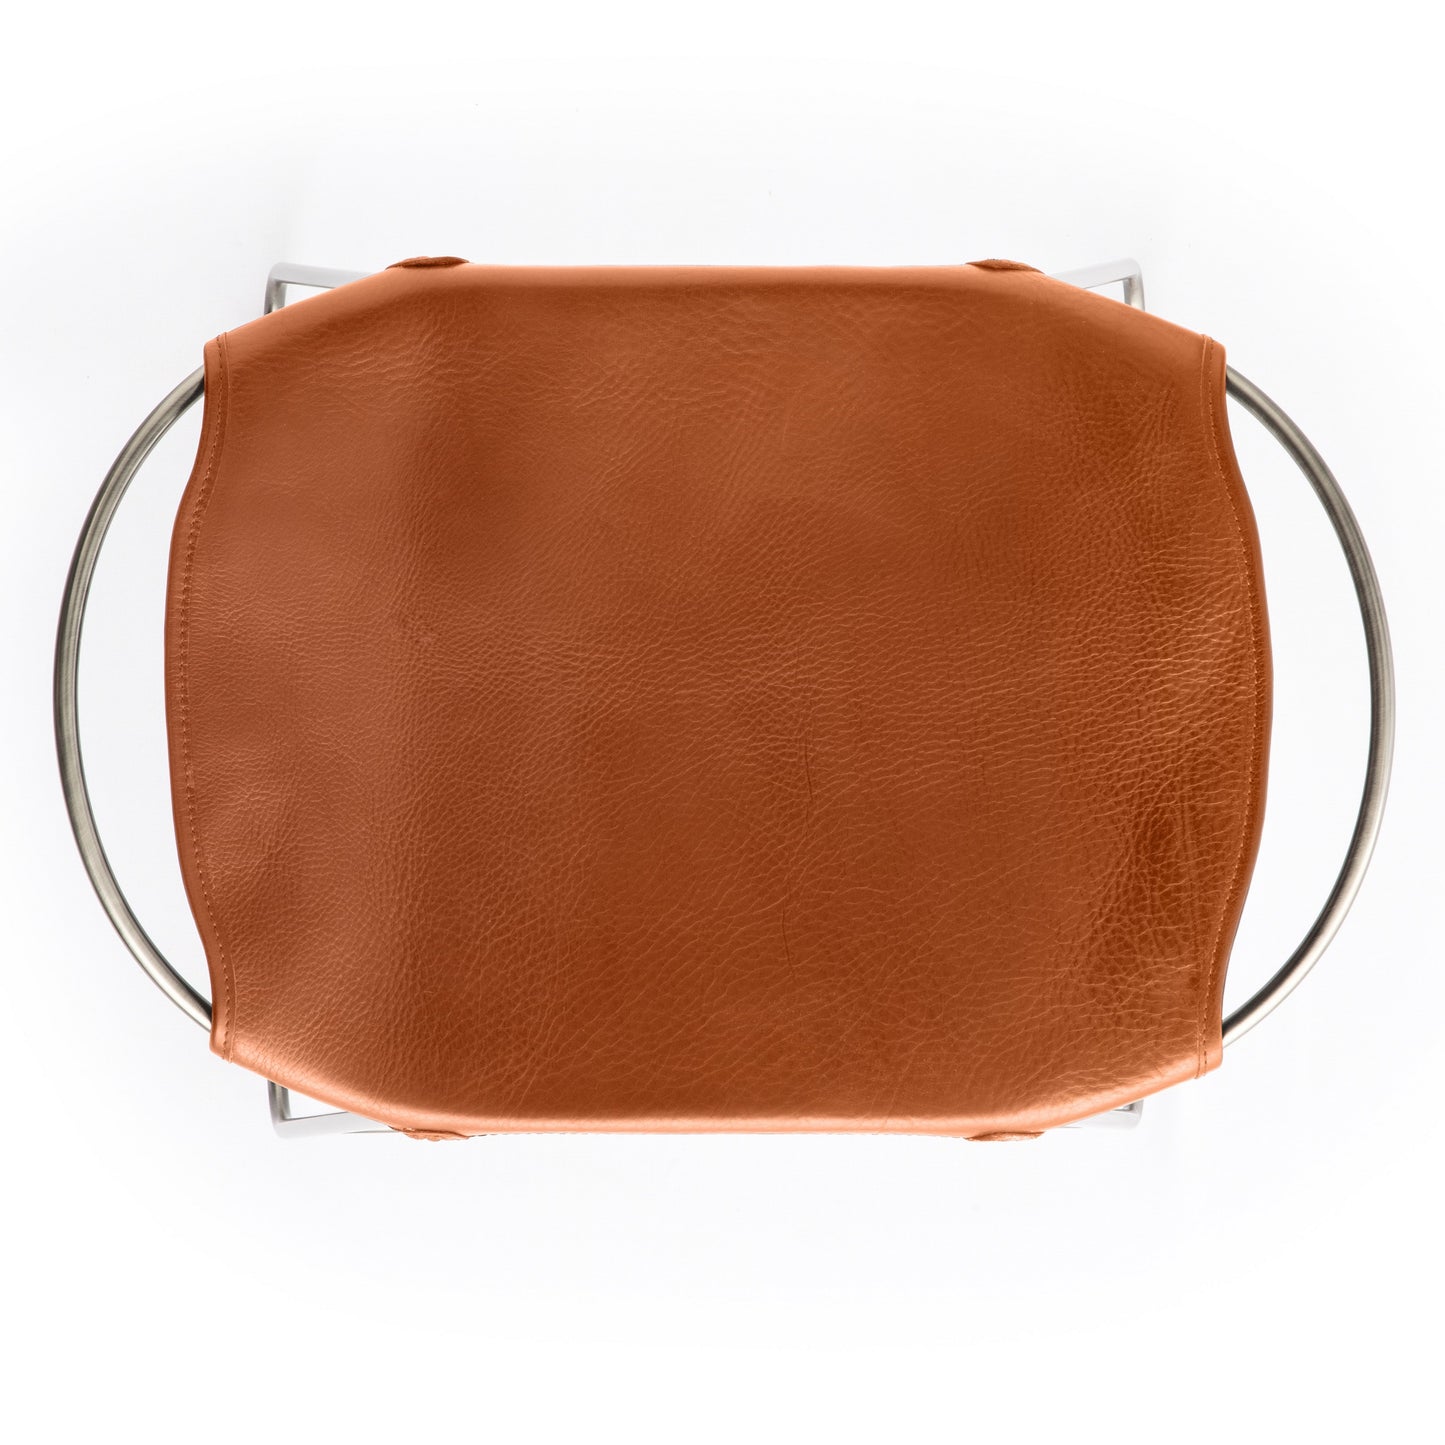 Hug Kitchen Stool - Handcrafted with Cowhide Leather